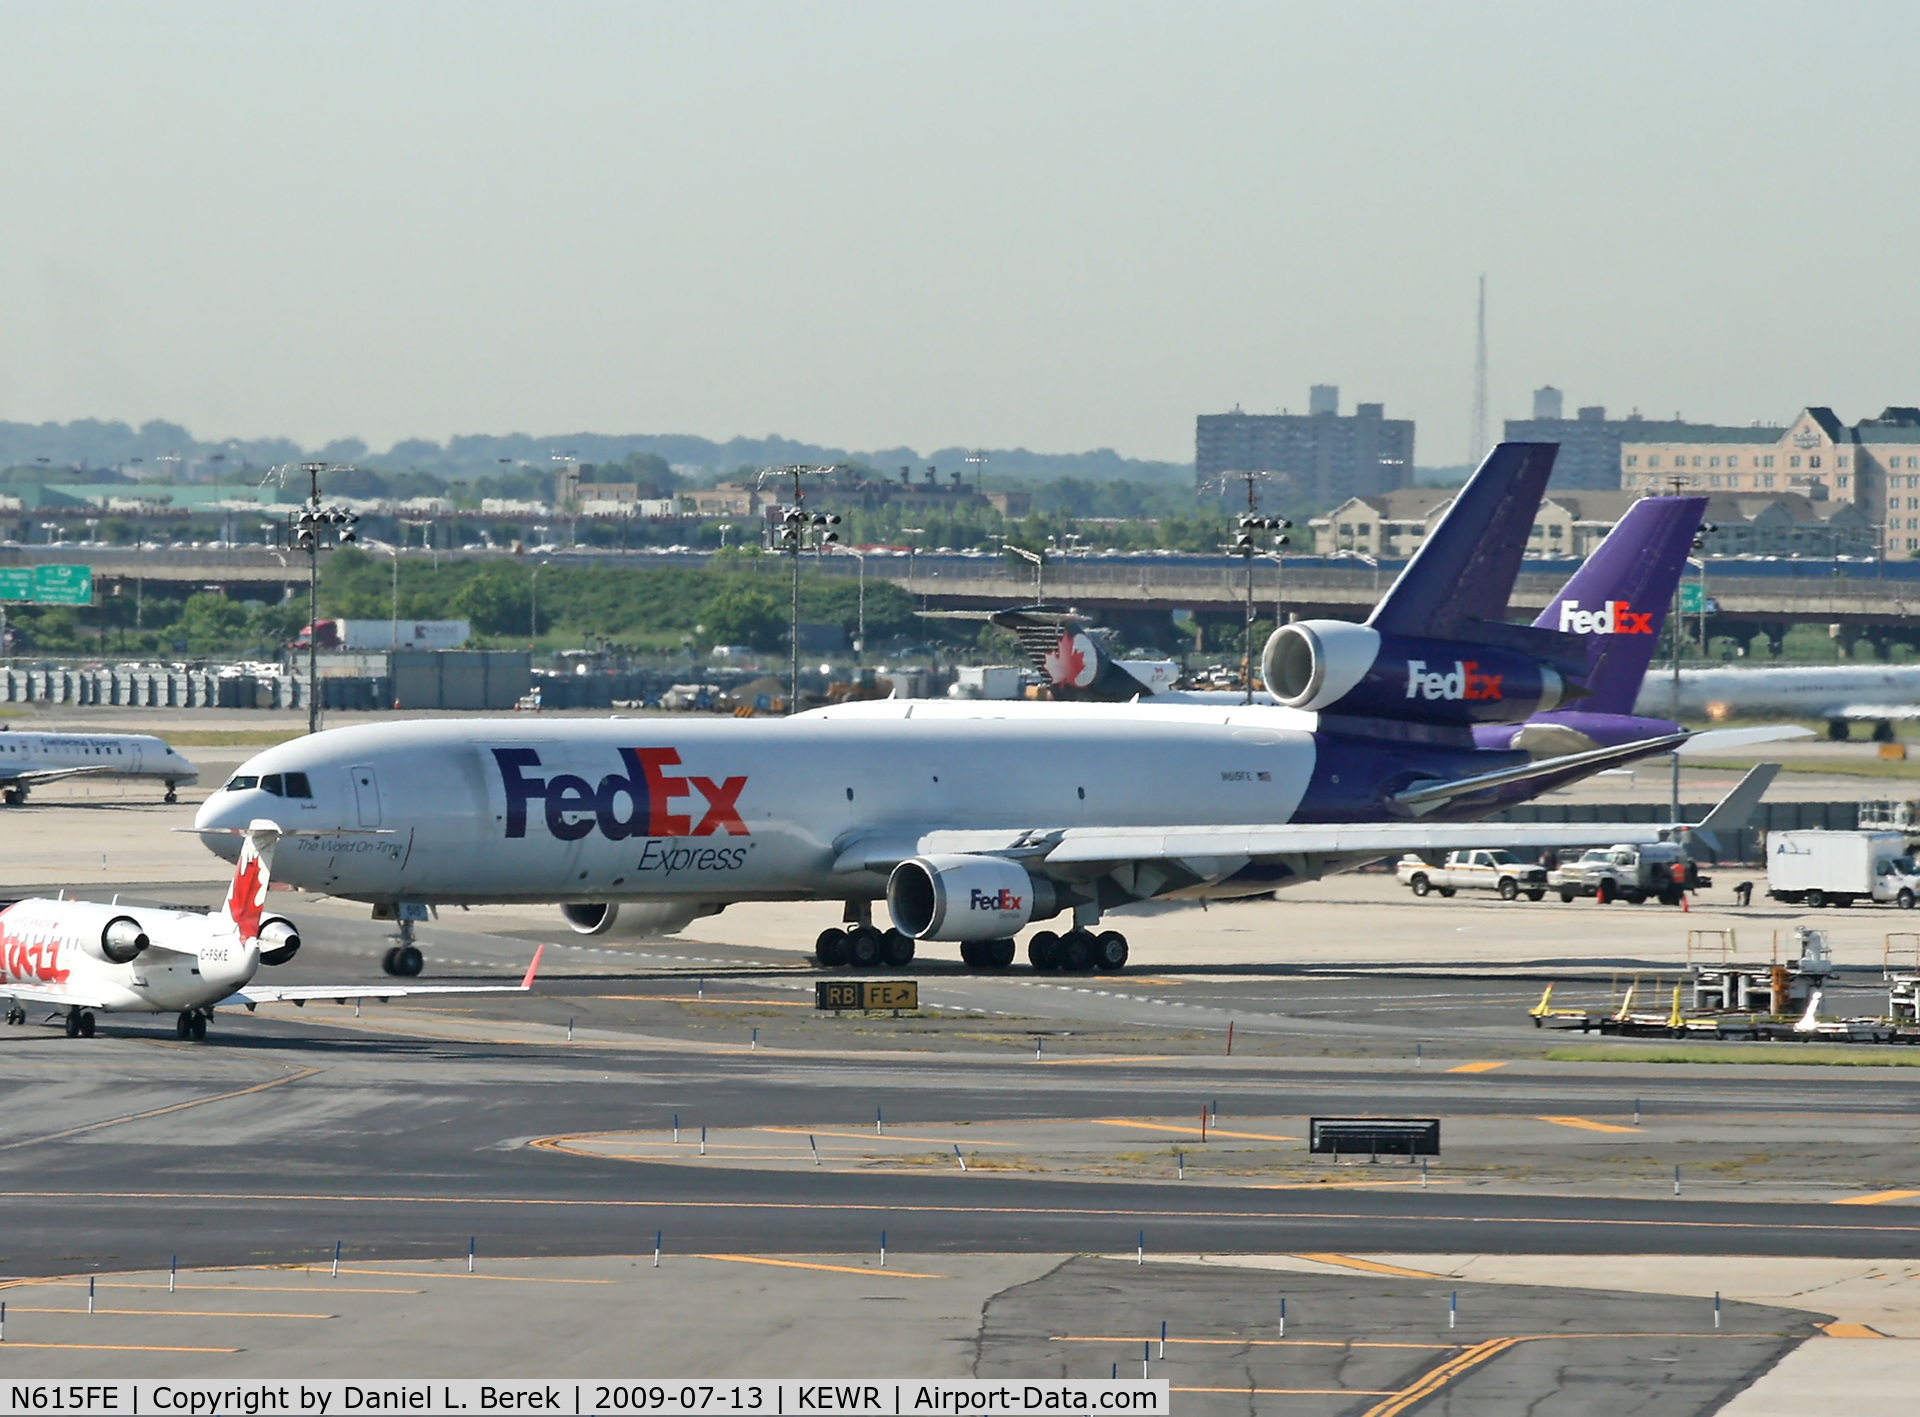 N615FE, 1996 McDonnell Douglas MD-11F C/N 48767, A FedEx freighter navigates the crowded ramp at Newark on a hot July morning in 2009.